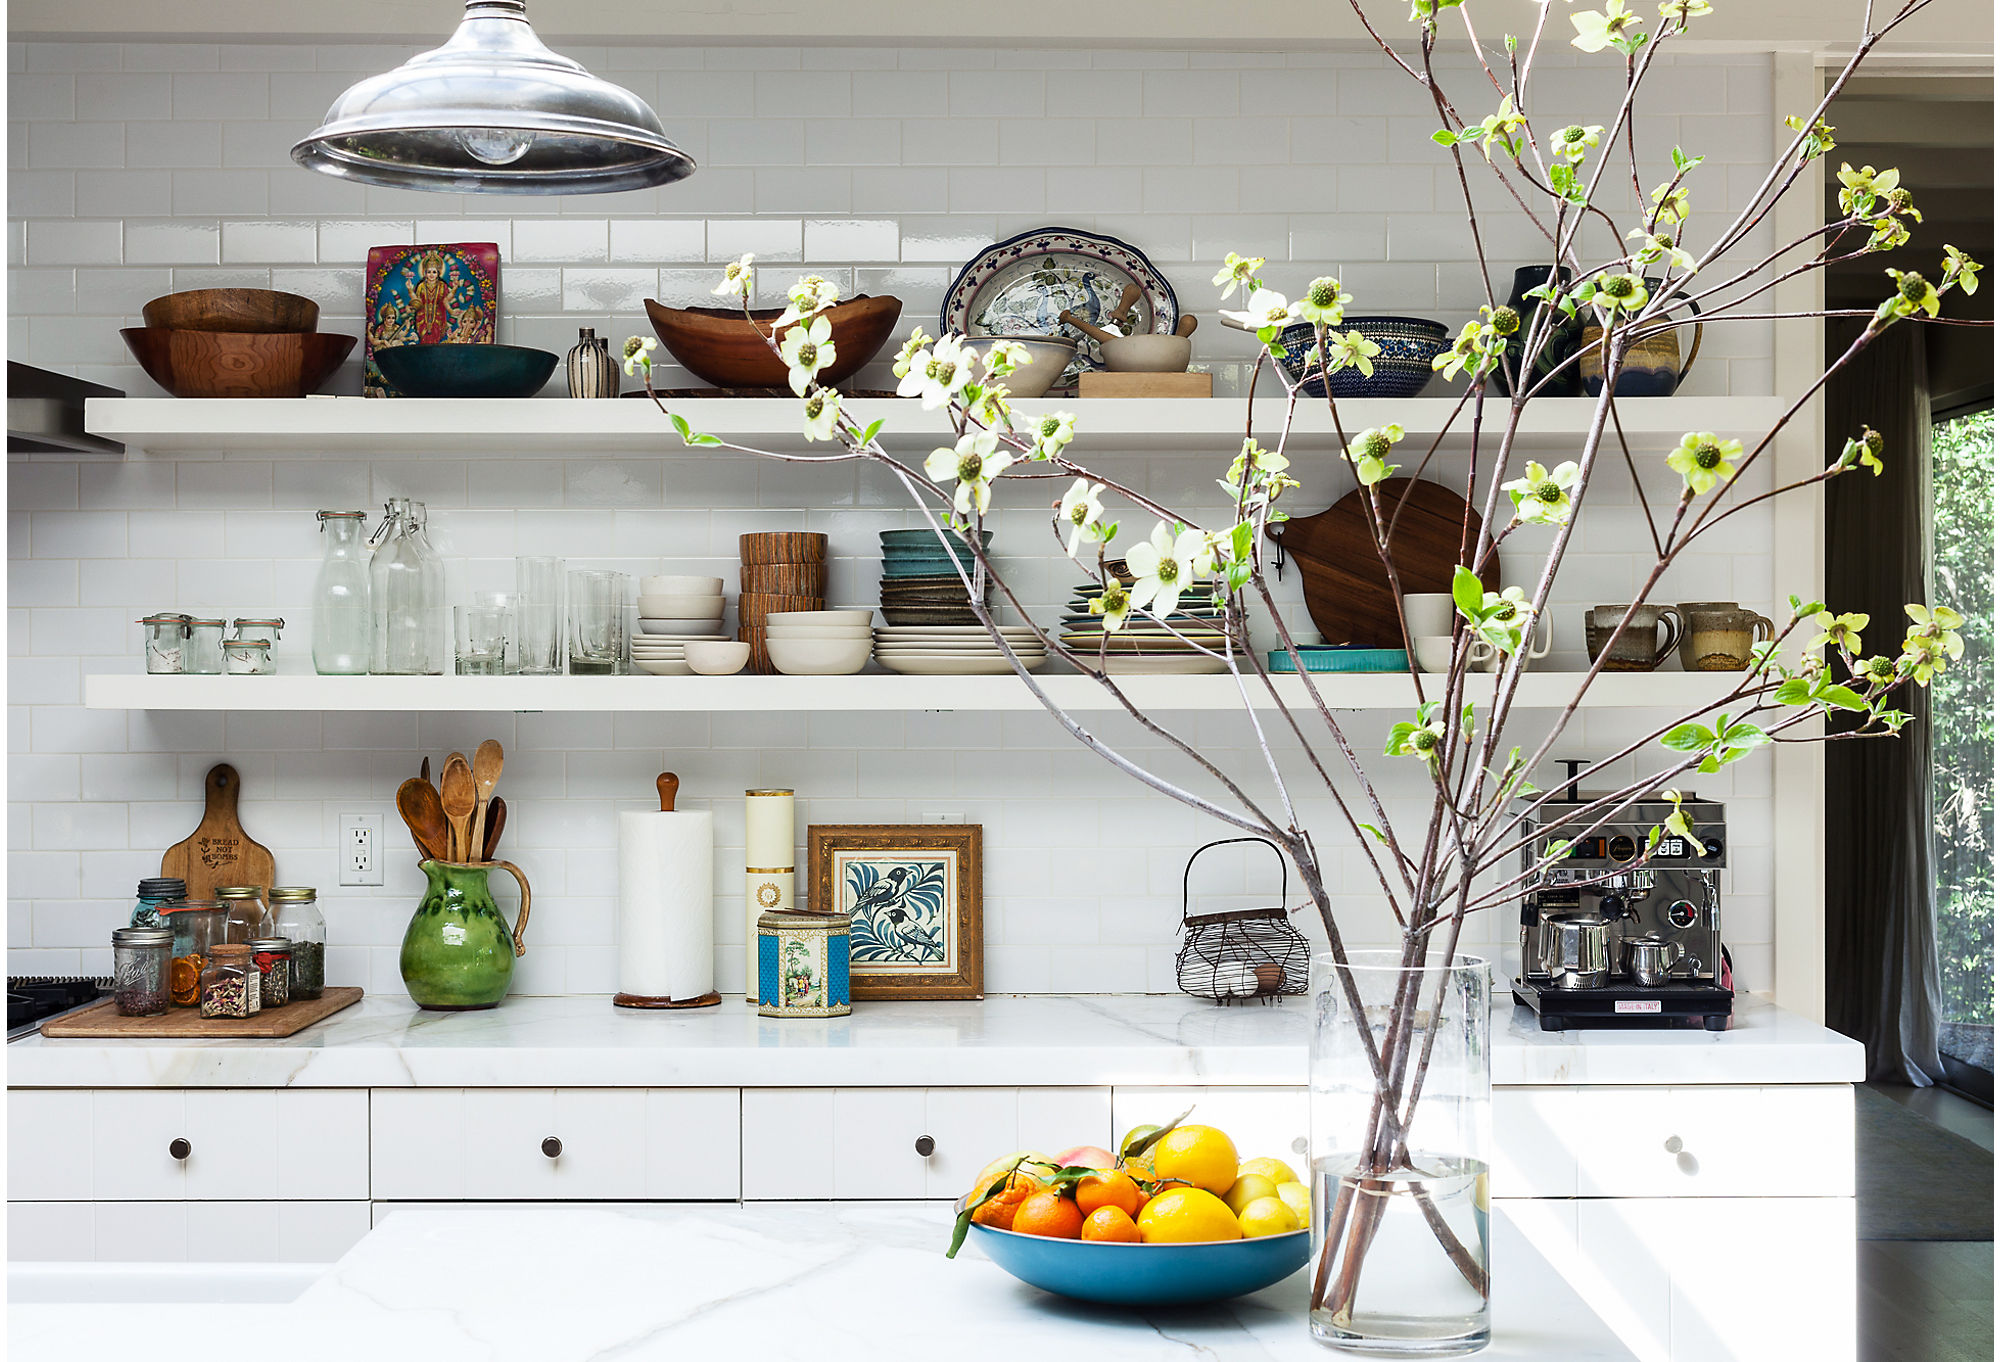 Bright white countertops are timeless, but there are some things you need to consider before you install. Photo by Nicole LaMotte.
